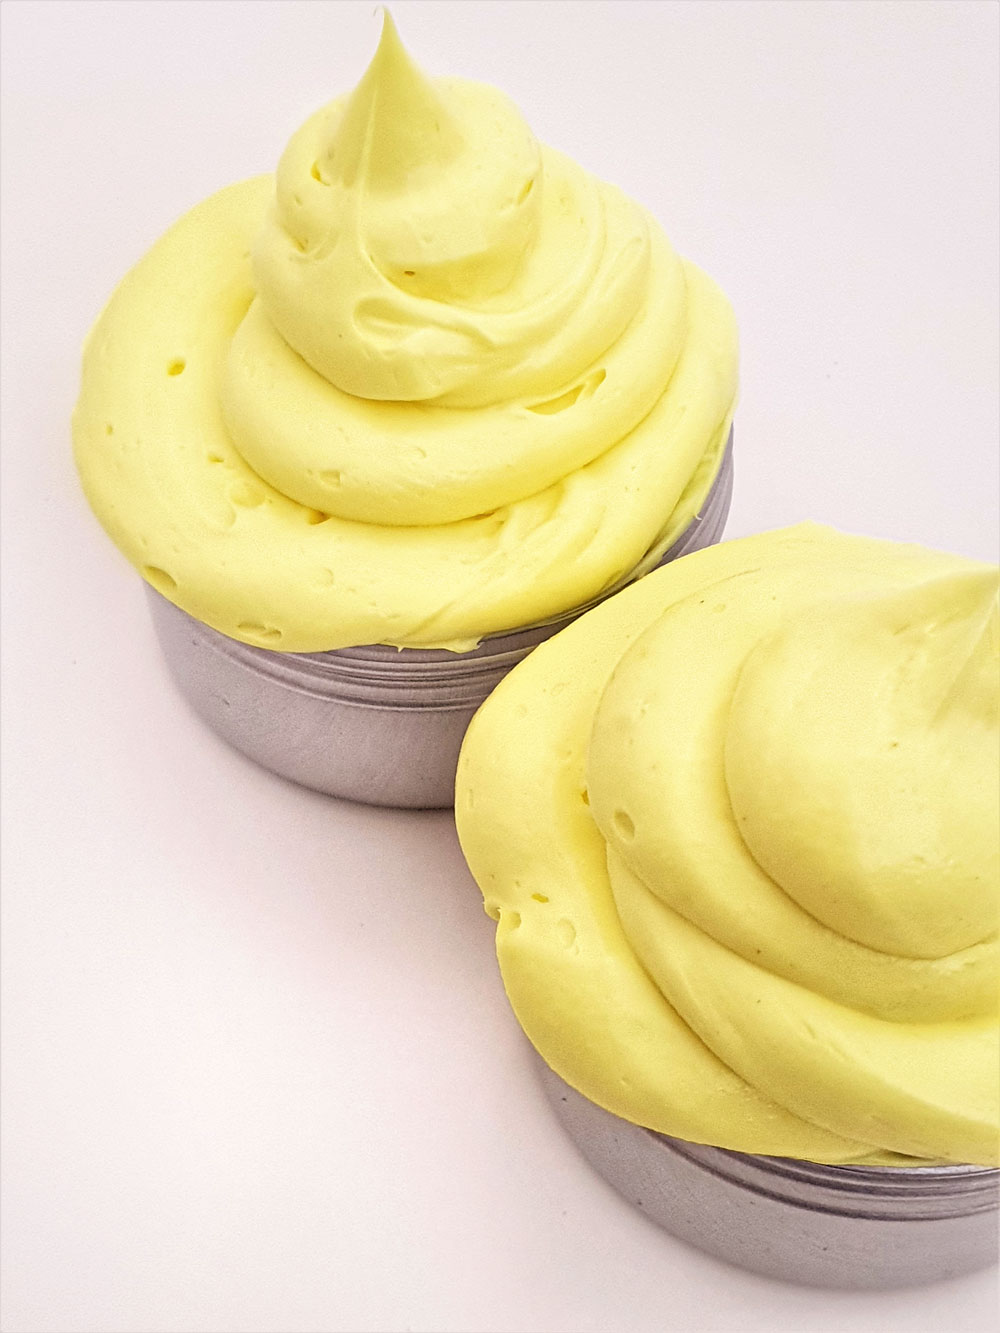 whipped turmeric body butter piped into jars with a piping bag